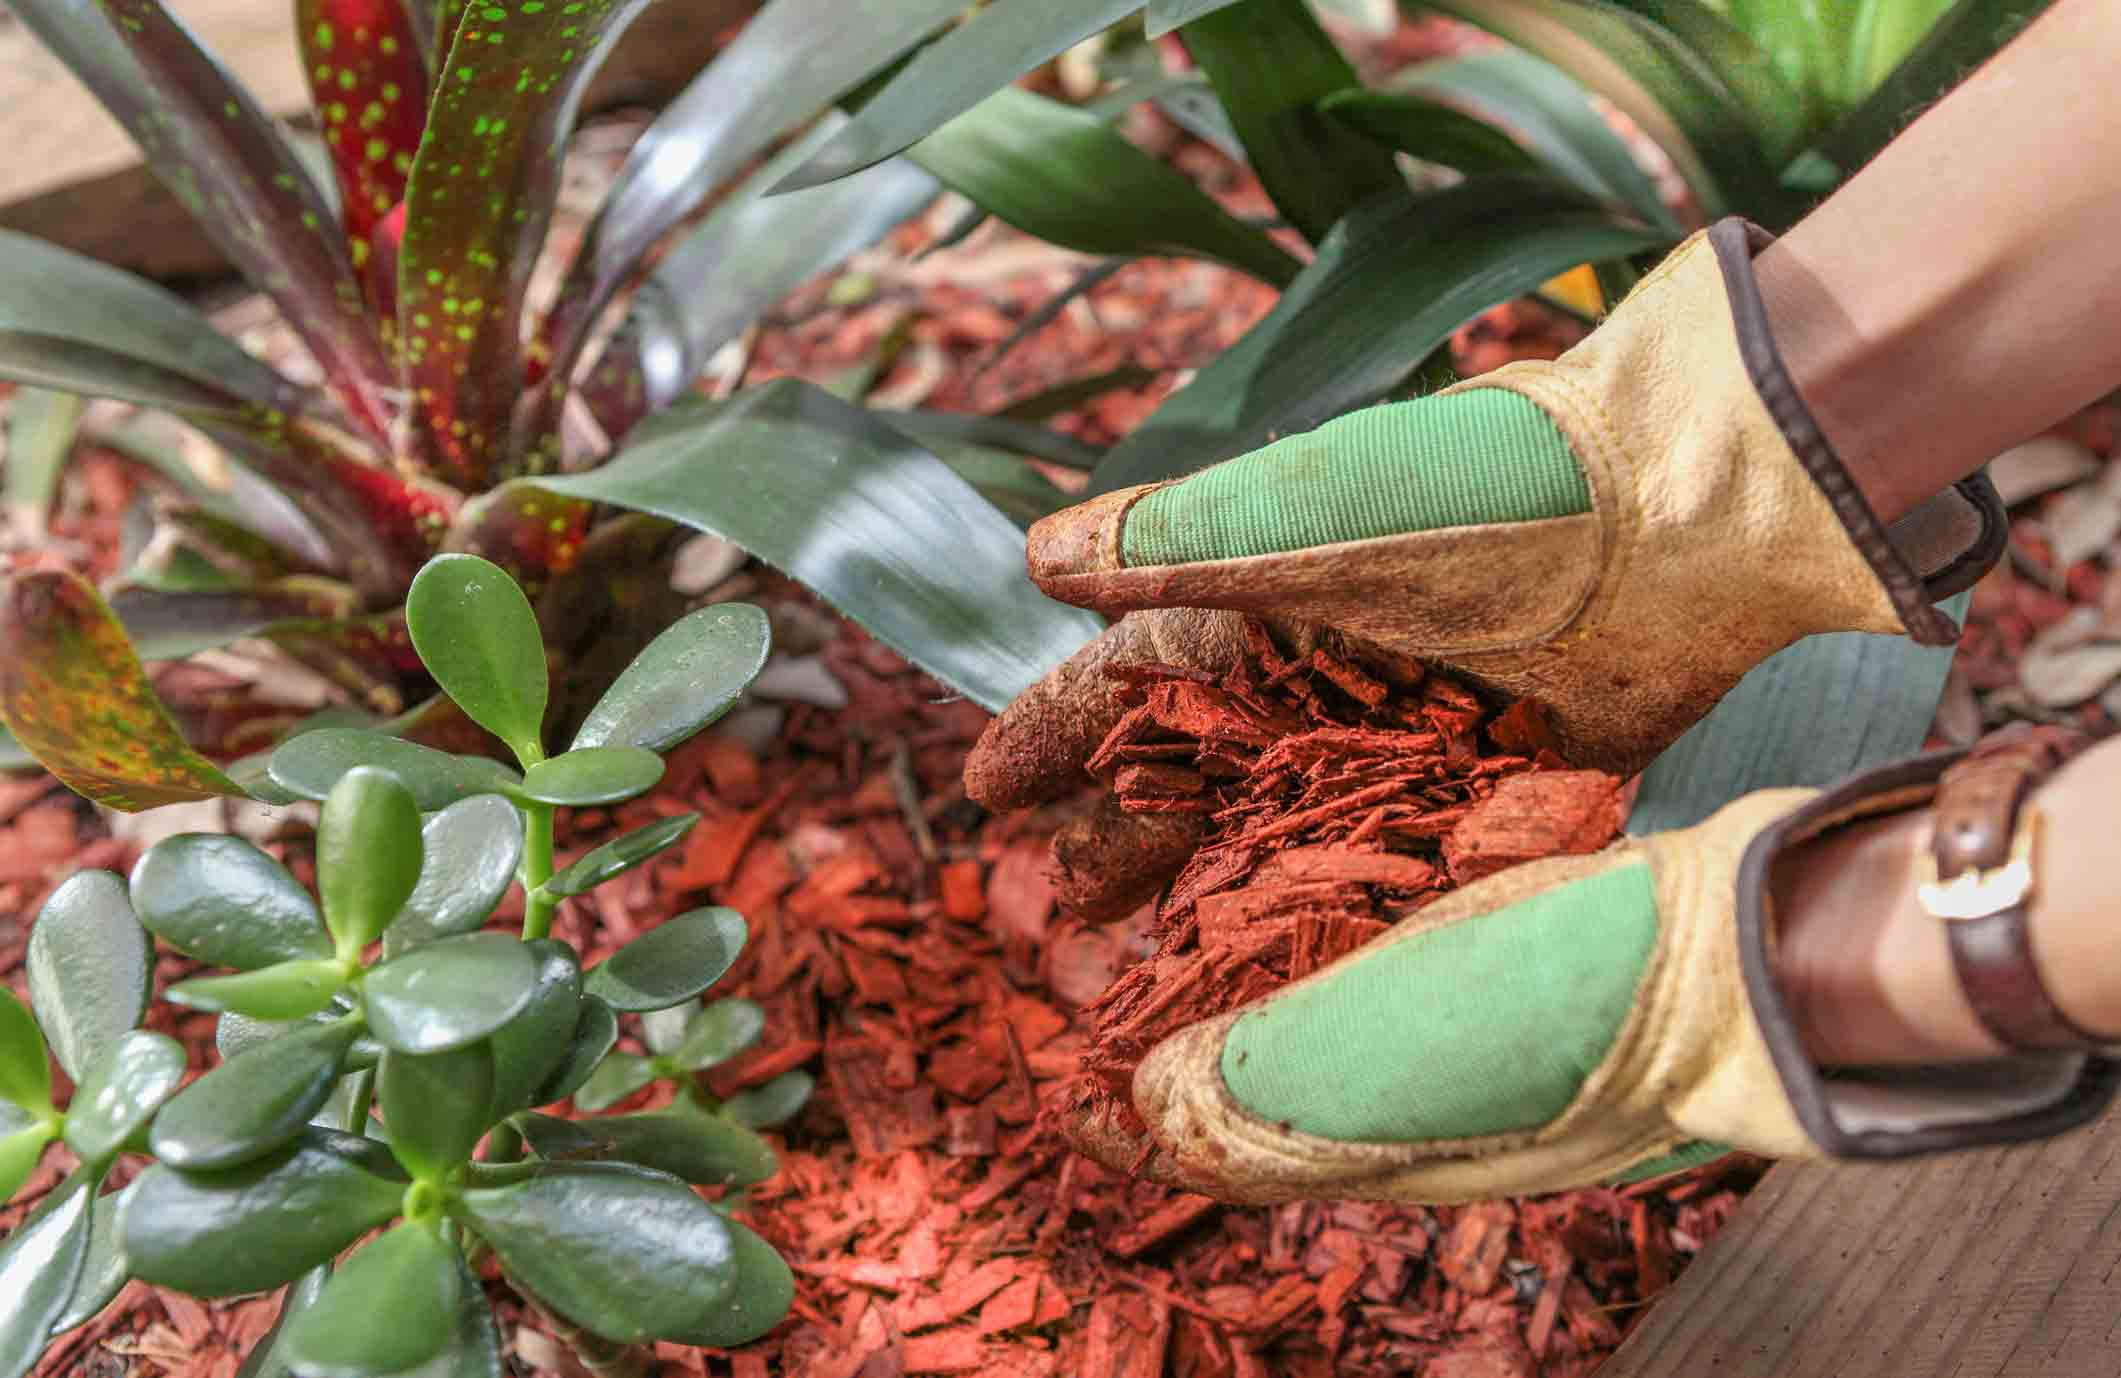 We know you love that "pretty" red mulch, but...